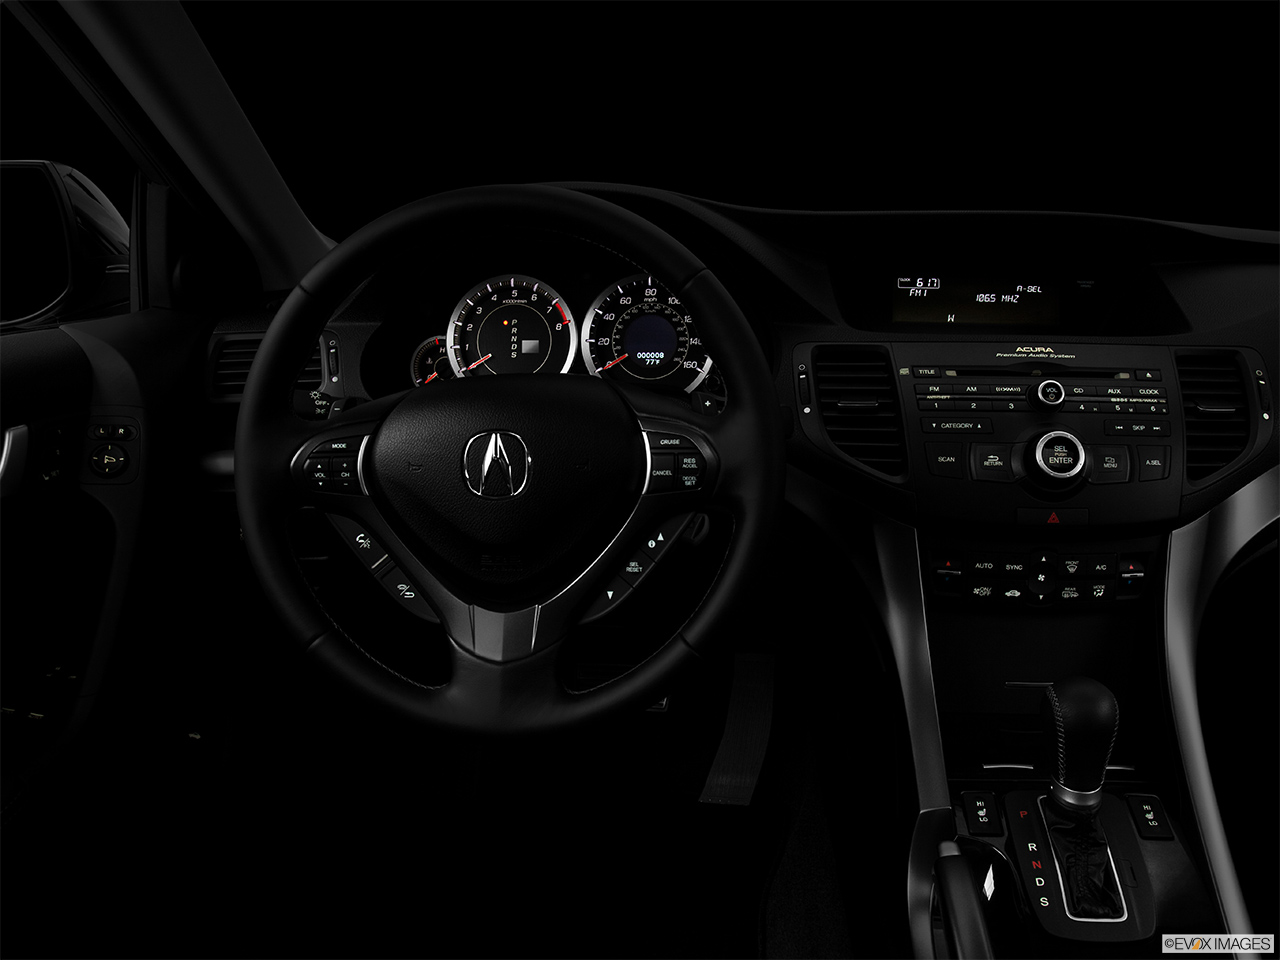 2014 Acura TSX 5-speed Automatic Centered wide dash shot - "night" shot. 